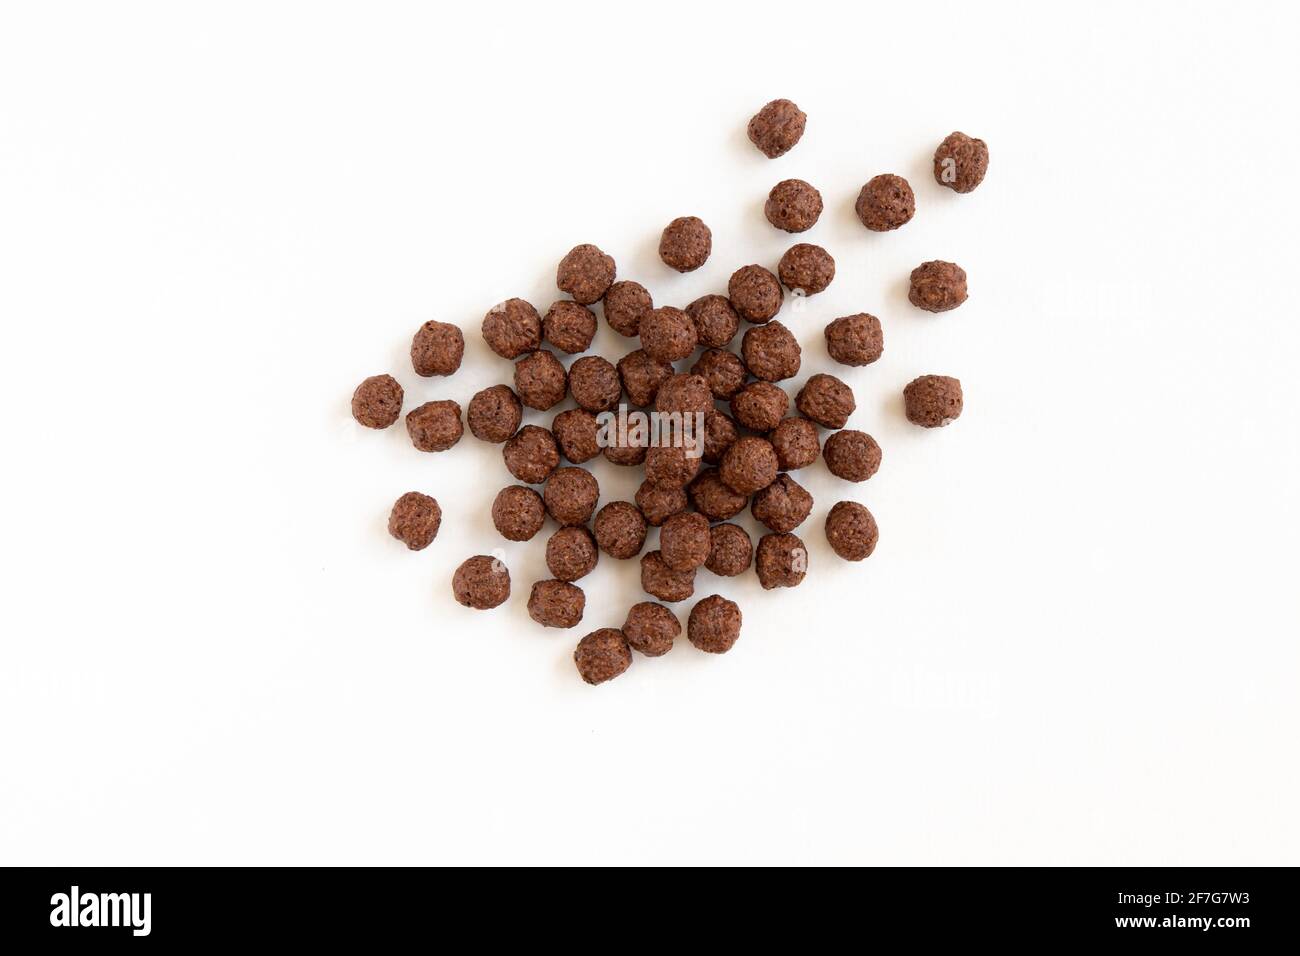 Crunchy chocolate cereal balls isolated on white background. Dry breakfast chocolate flavored balls. Top view Stock Photo